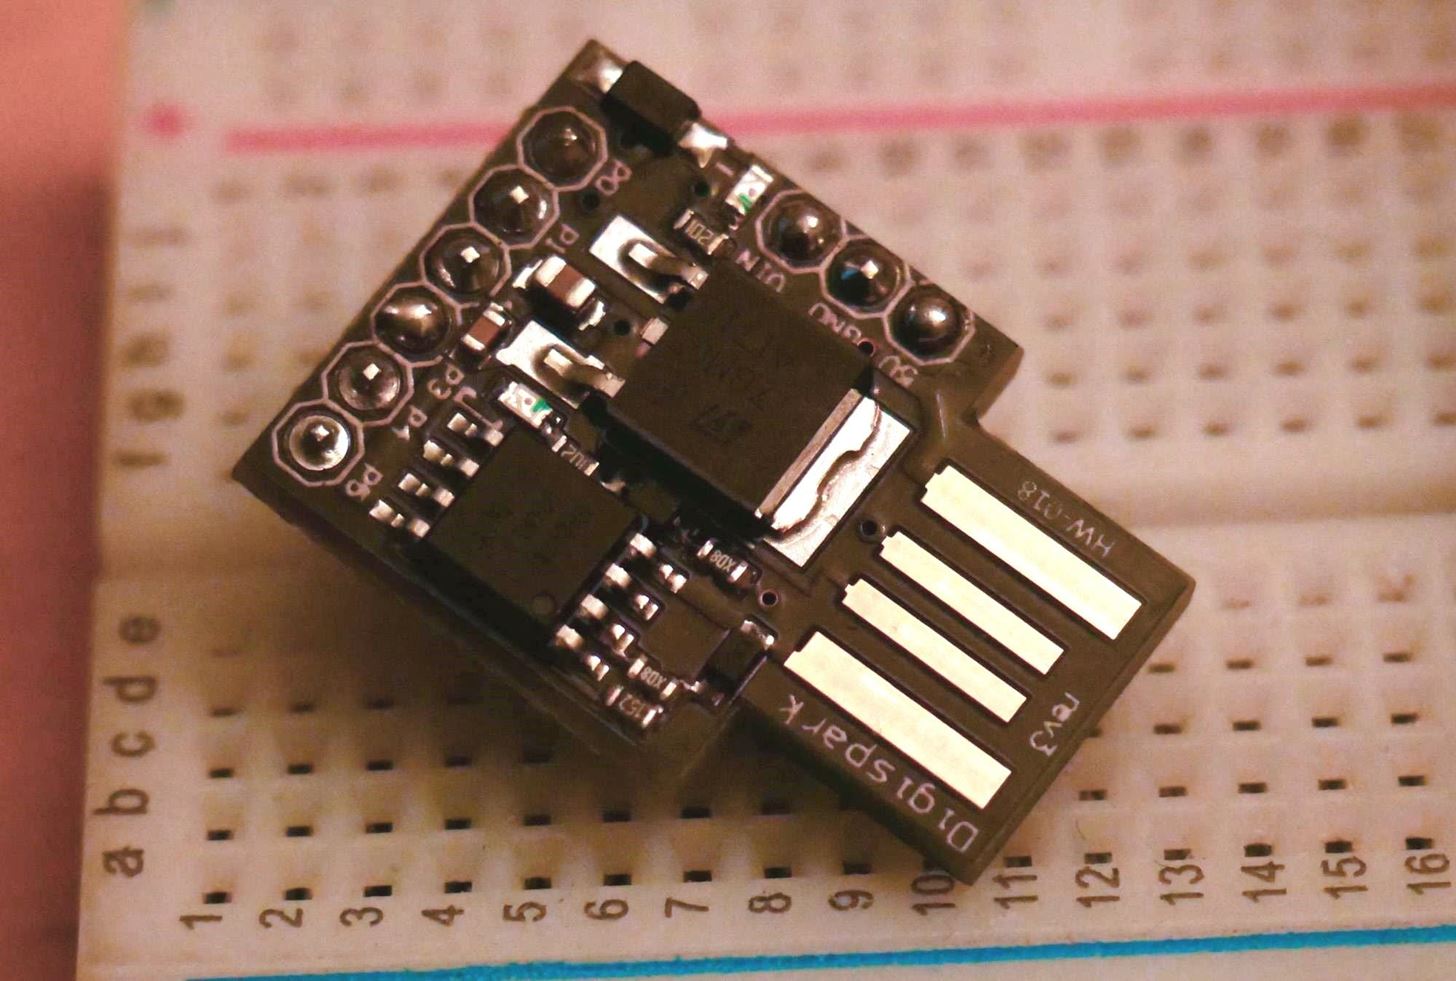 How to Run USB Rubber Ducky Scripts on a Super Inexpensive Digispark Board